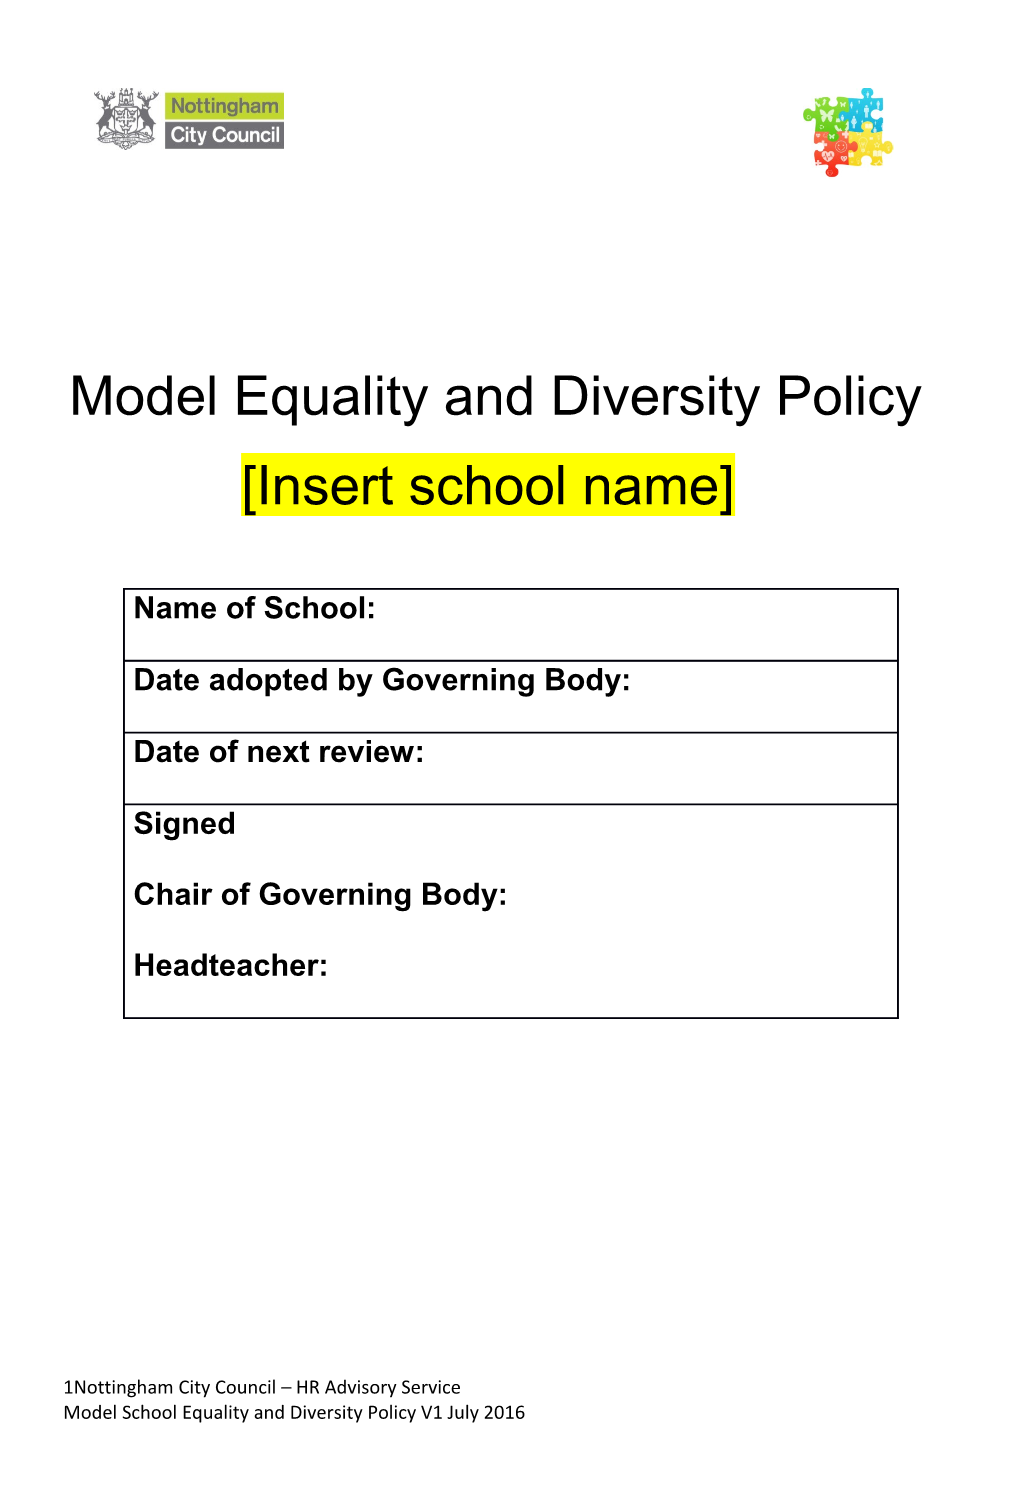 Model Equality and Diversity Policy